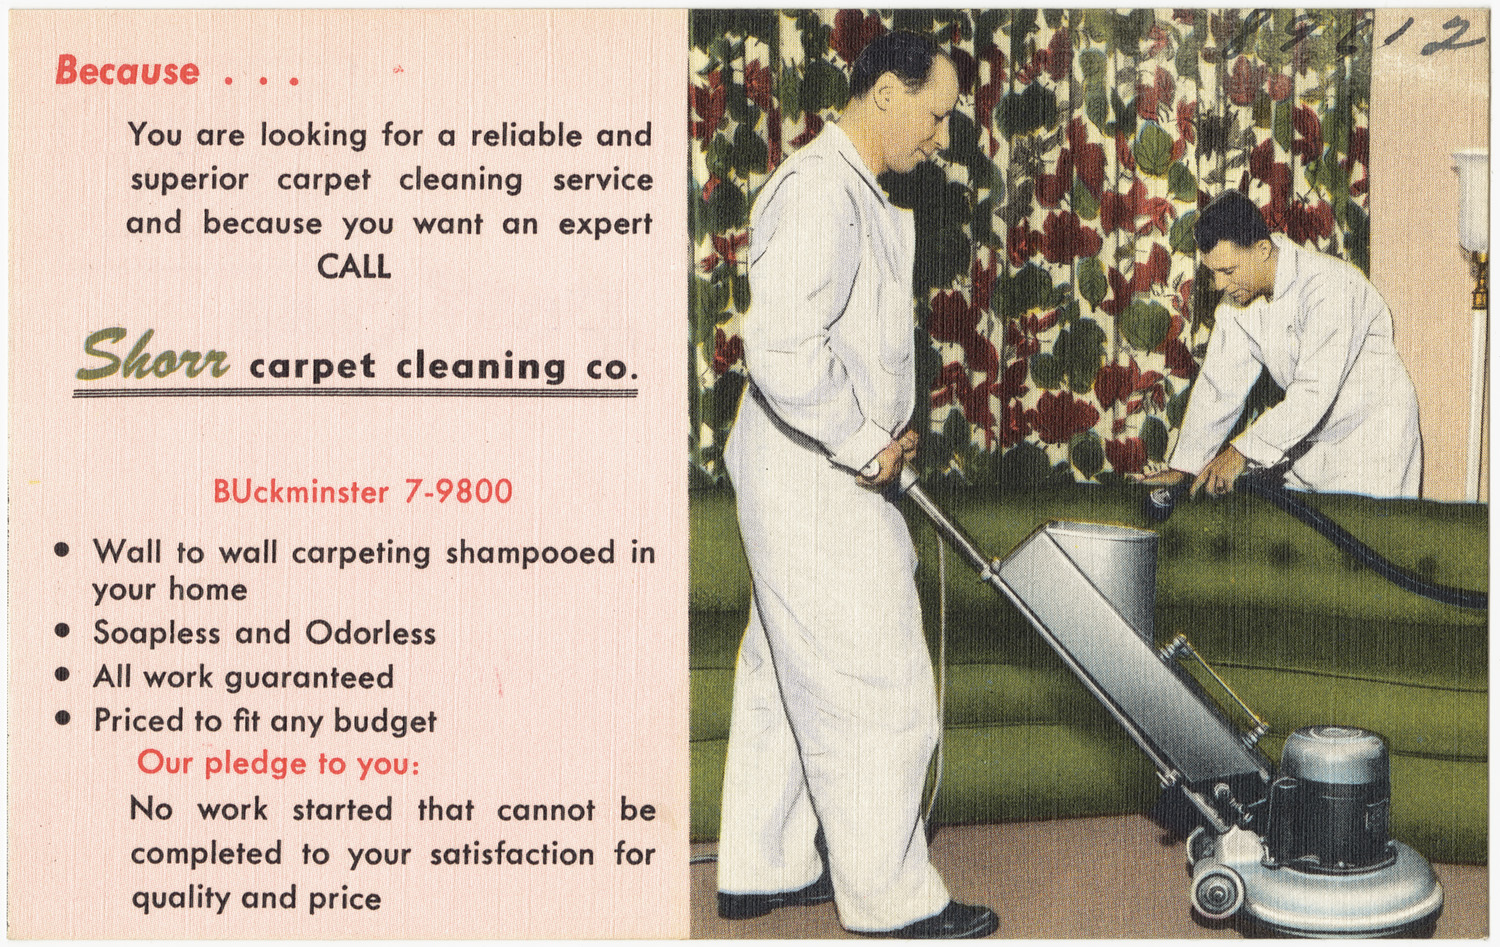 Commercial carpet cleaning services in Edmonton